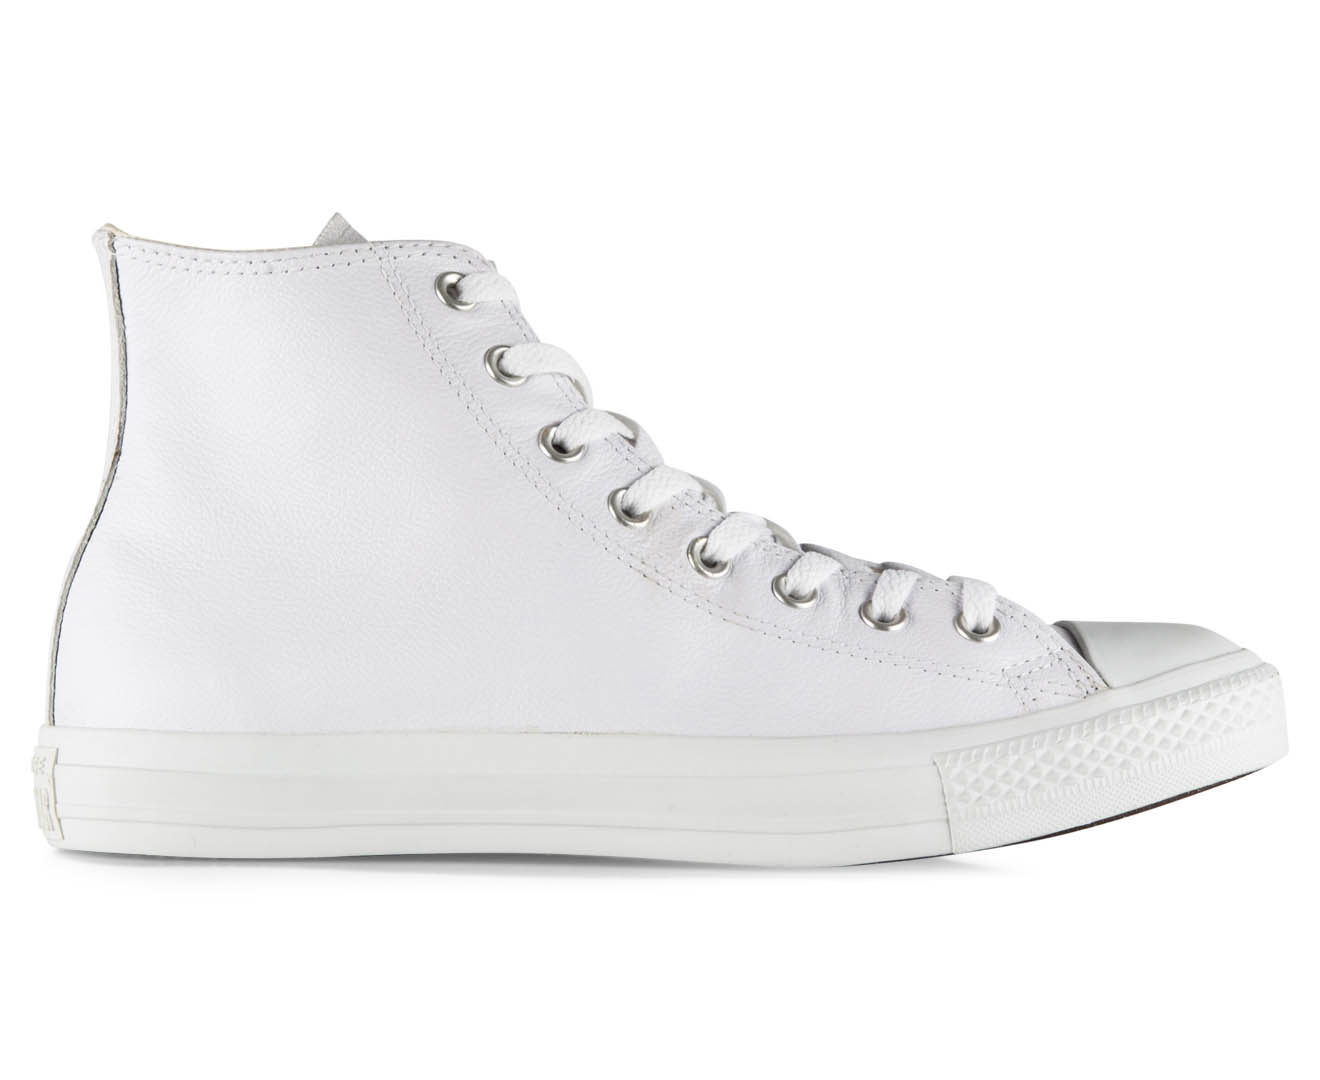 Converse Chuck Taylor All Star Leather High Top Sneakers - White ...